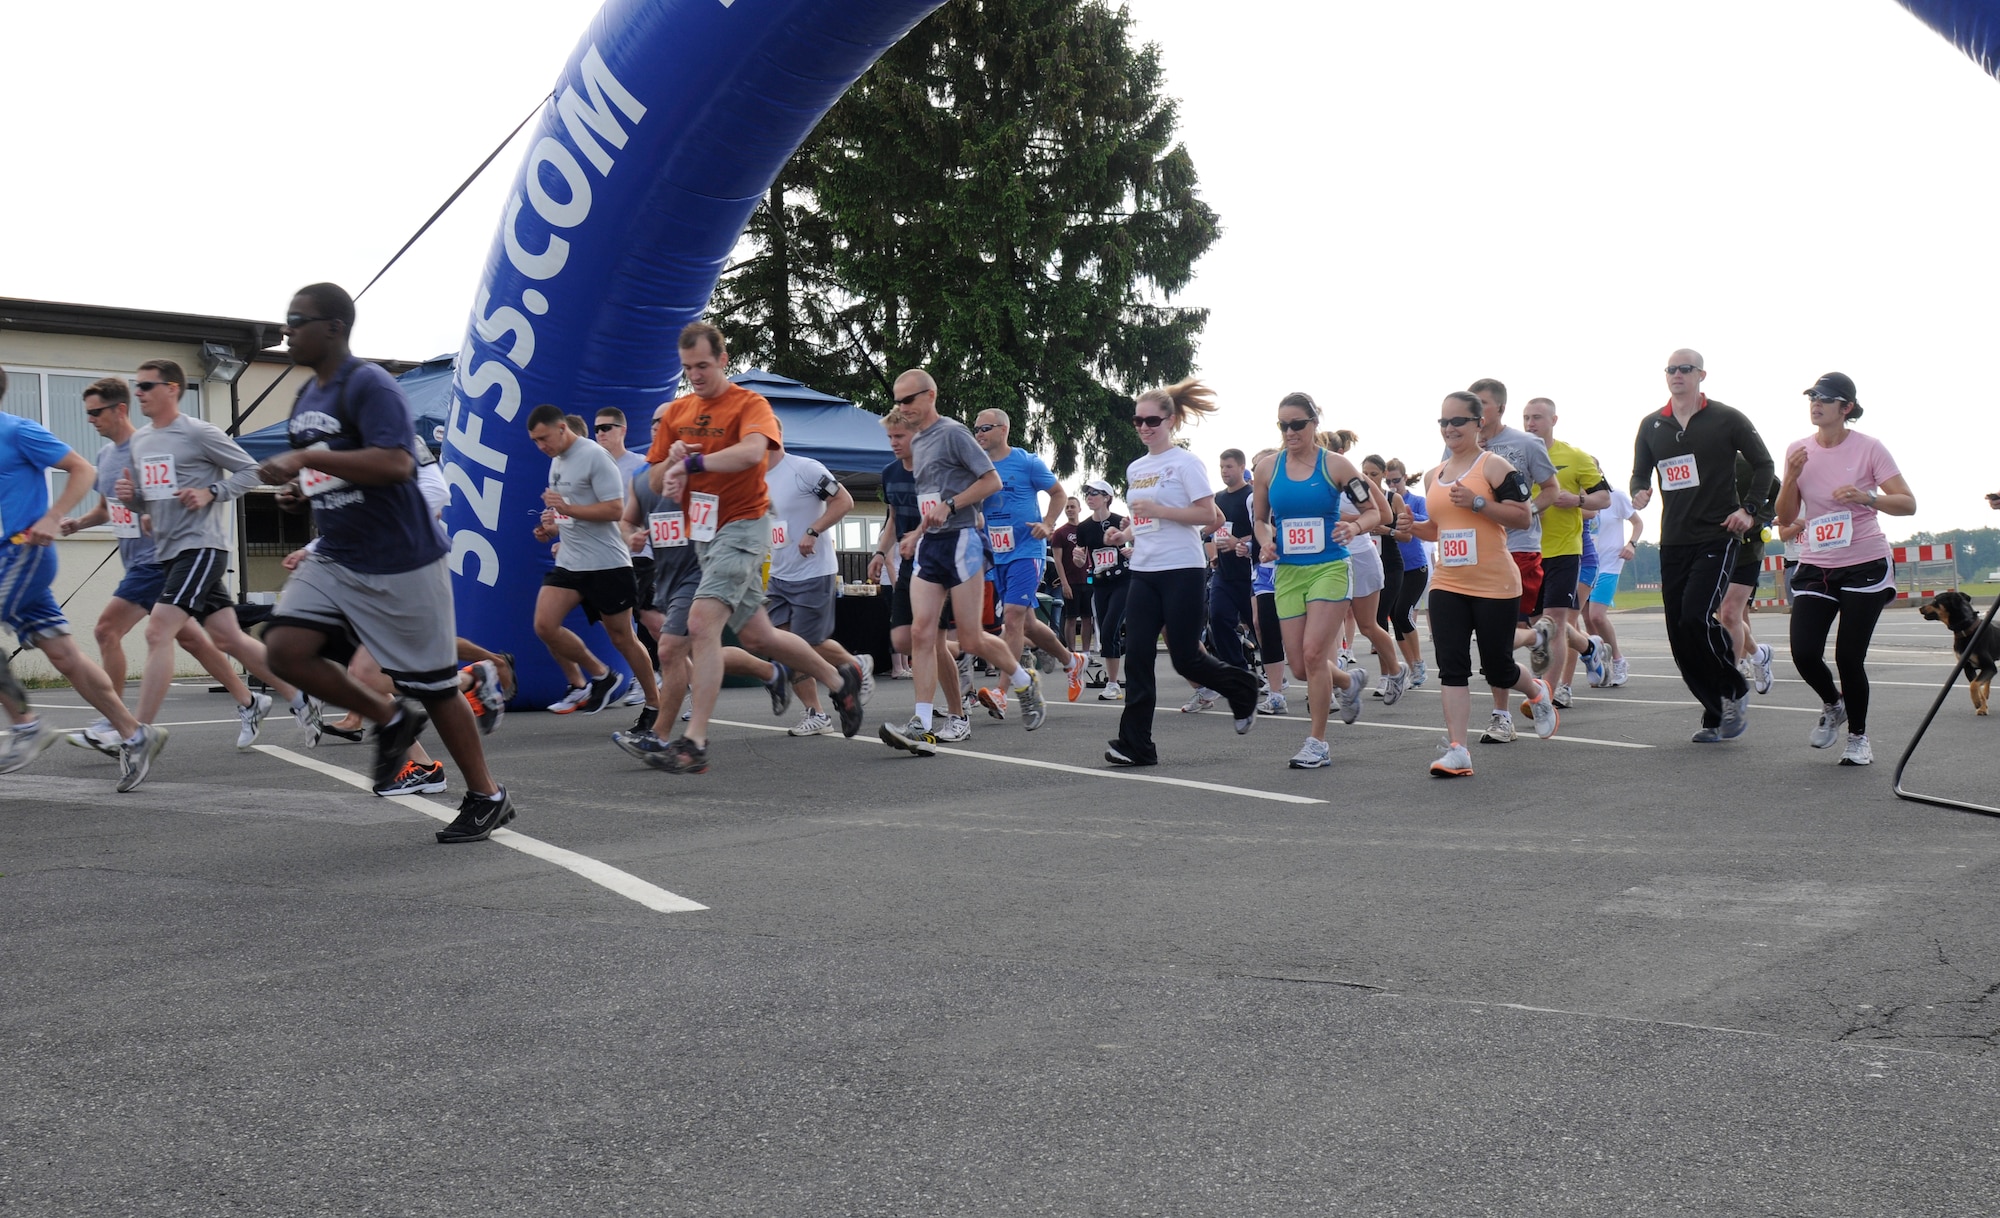 SPANGDAHLEM AIR BASE, Germany – Runners take off from the starting line during the 10K and U.S. Air Forces in Europe half marathon in the parking lot behind the Skelton Memorial Fitness Center here May 14. The USAFE half marathon is an annual event Airmen from around Europe can participate in. Each run was split into different categories based on age and gender. (U.S. Air Force photo/Airman 1st Class Brittney Frees)